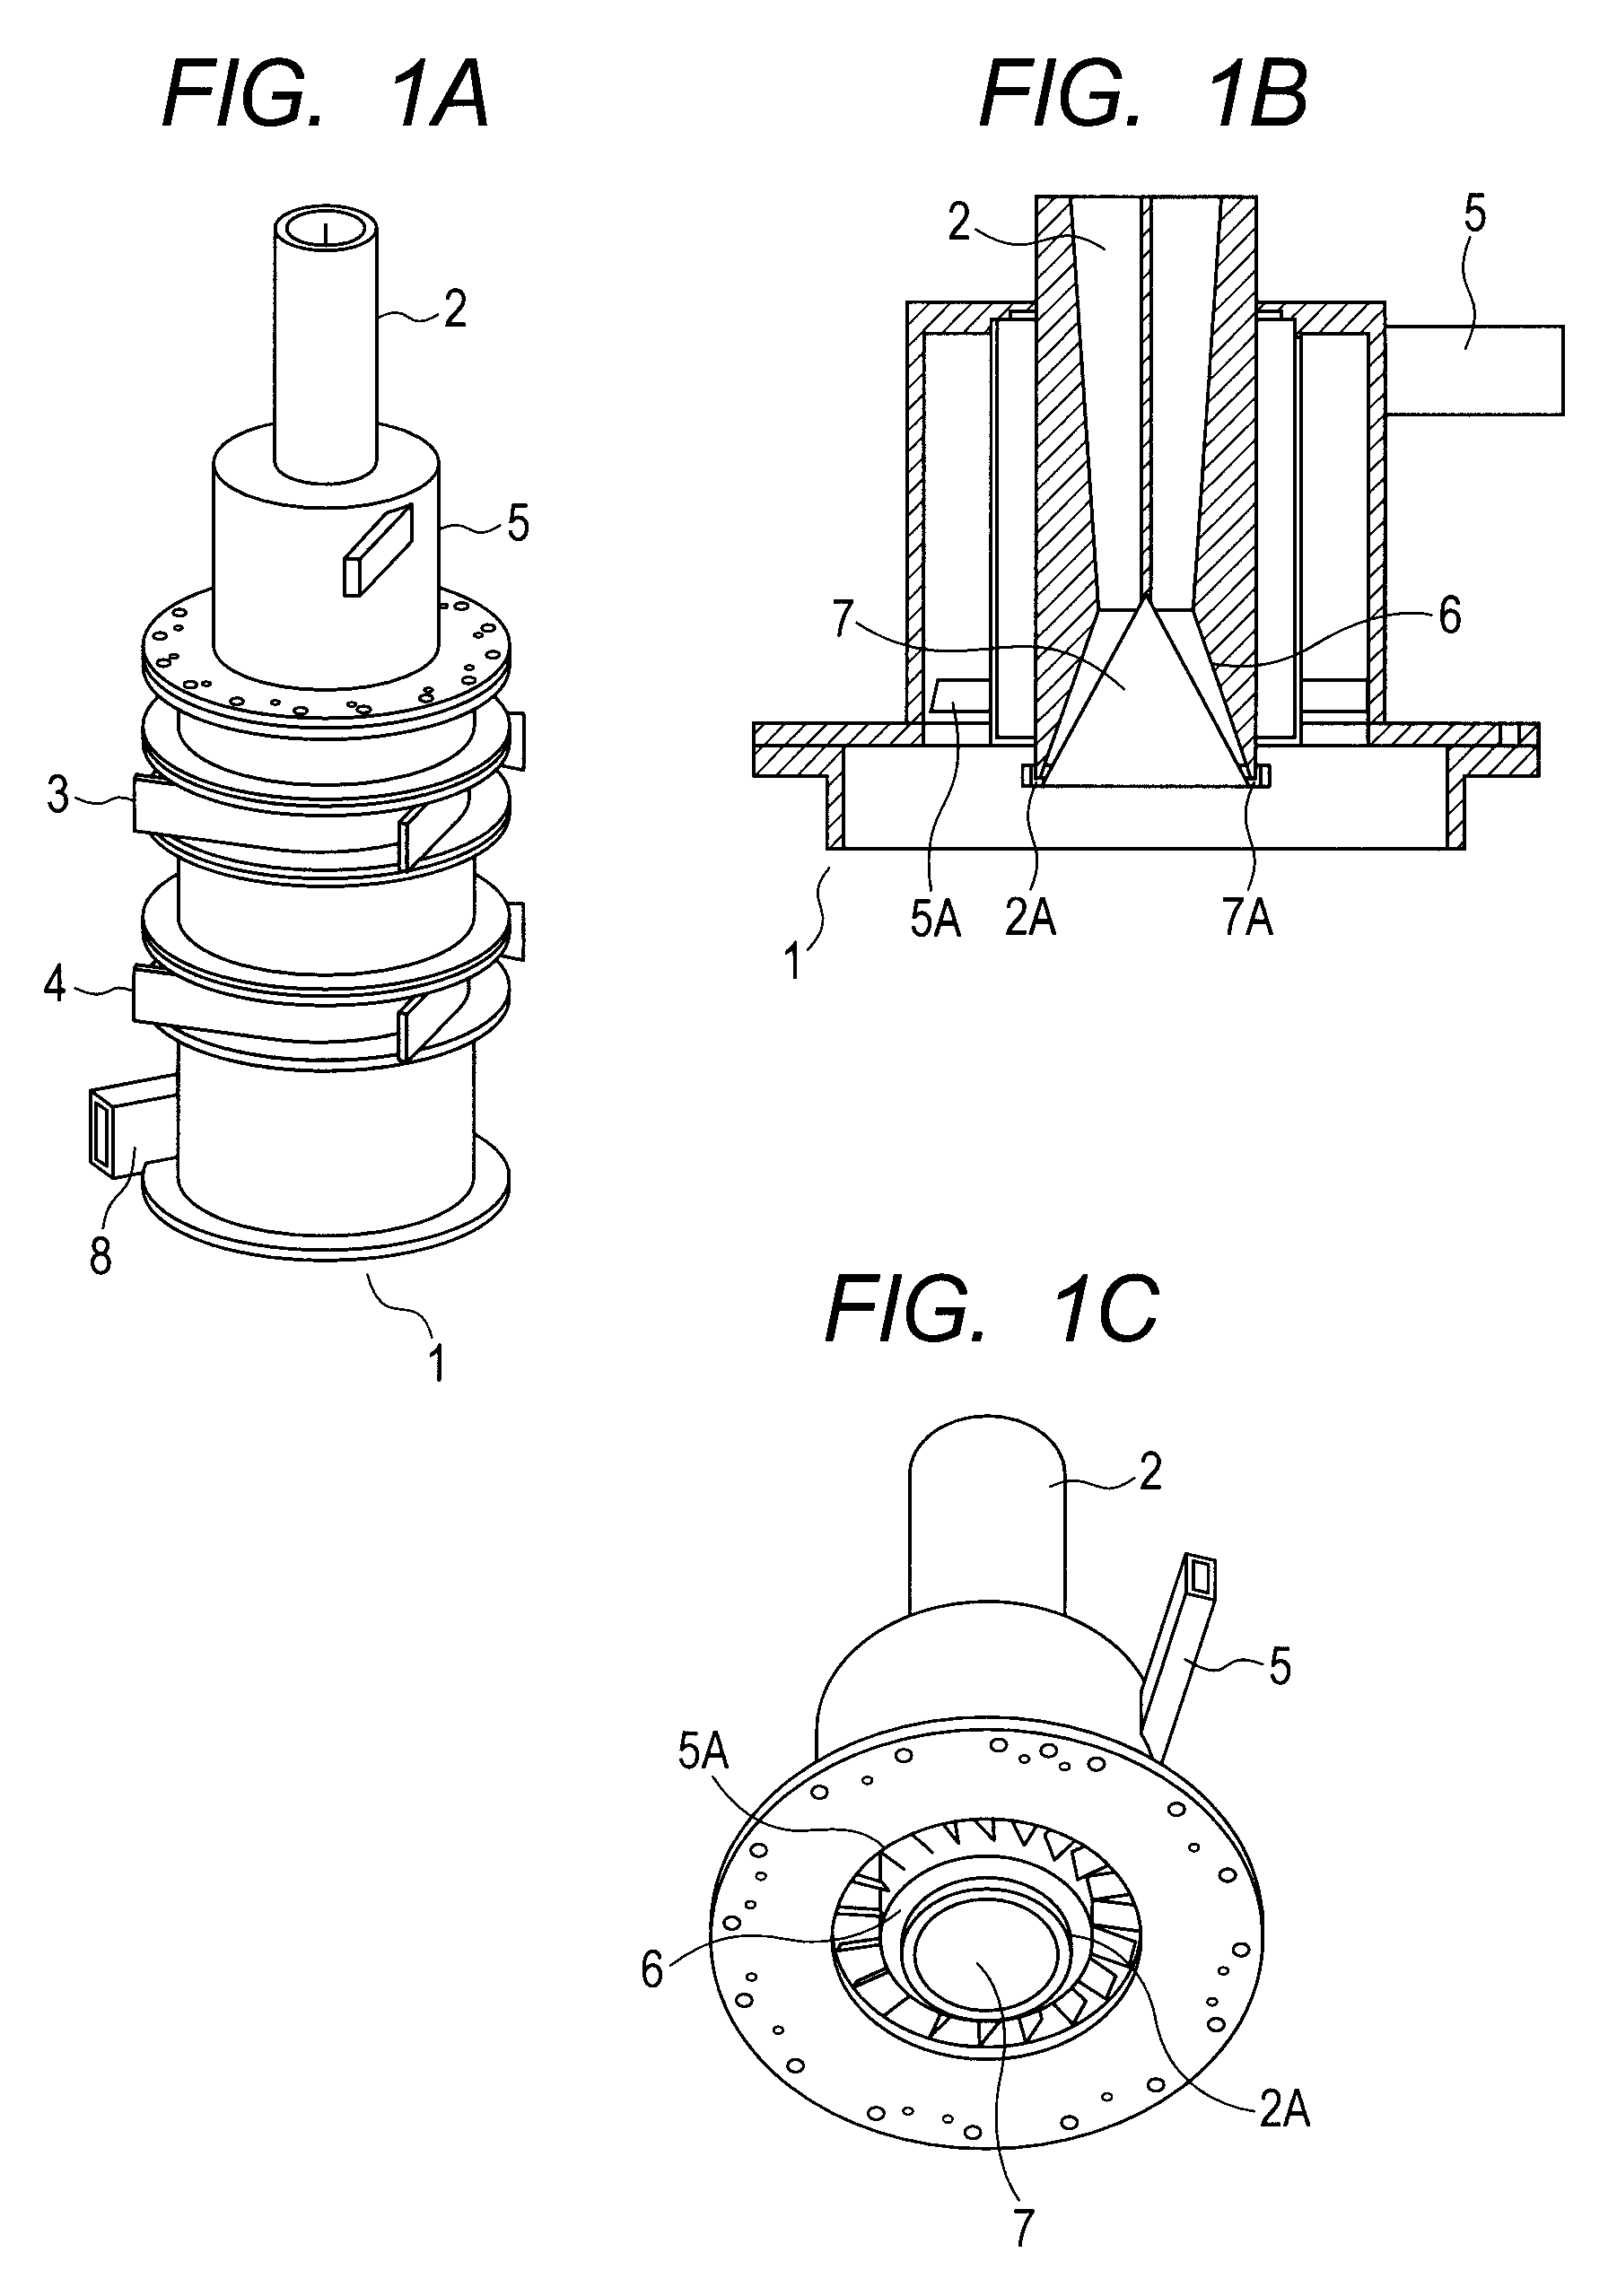 Heat treatment apparatus and method for manufacturing toner